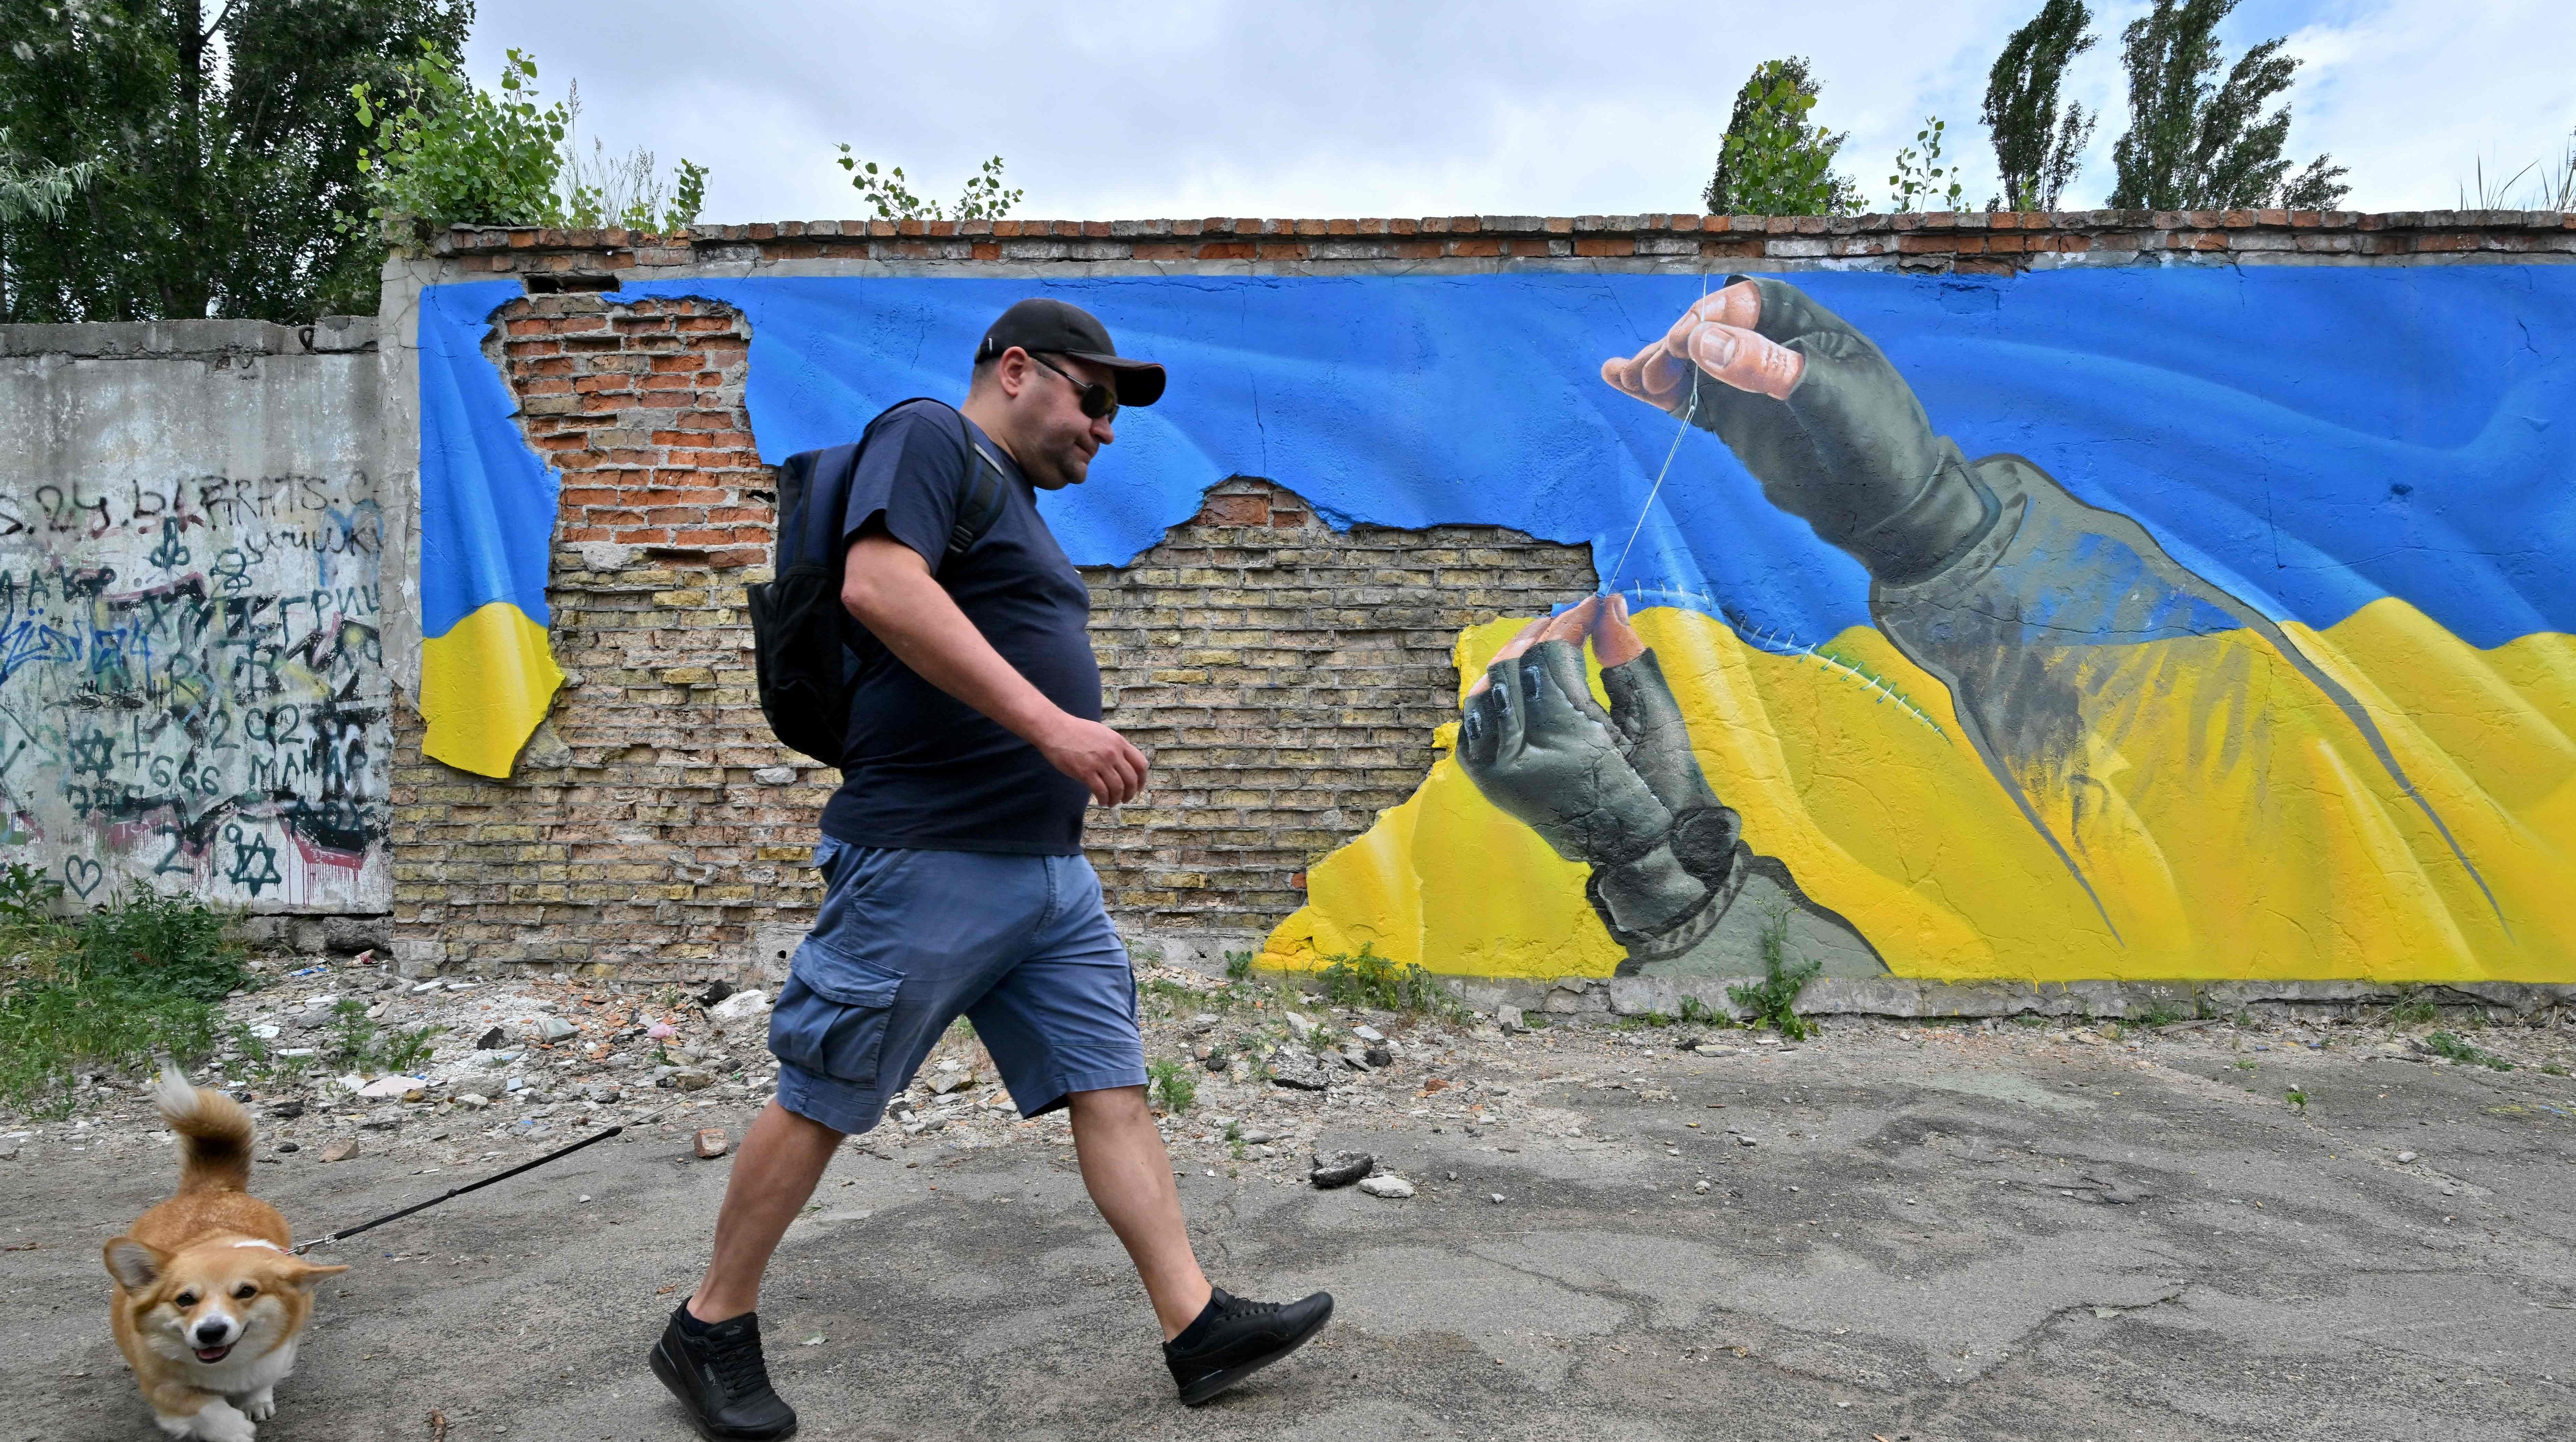 A man walks with his dog past a mural by street artist Sasha Korban depicting hands of a military man sewing together parts of the Ukrainian flag, in Kyiv on June 14, 2022. (Photo: SERGEI SUPINSKY/AFP, Getty Images)